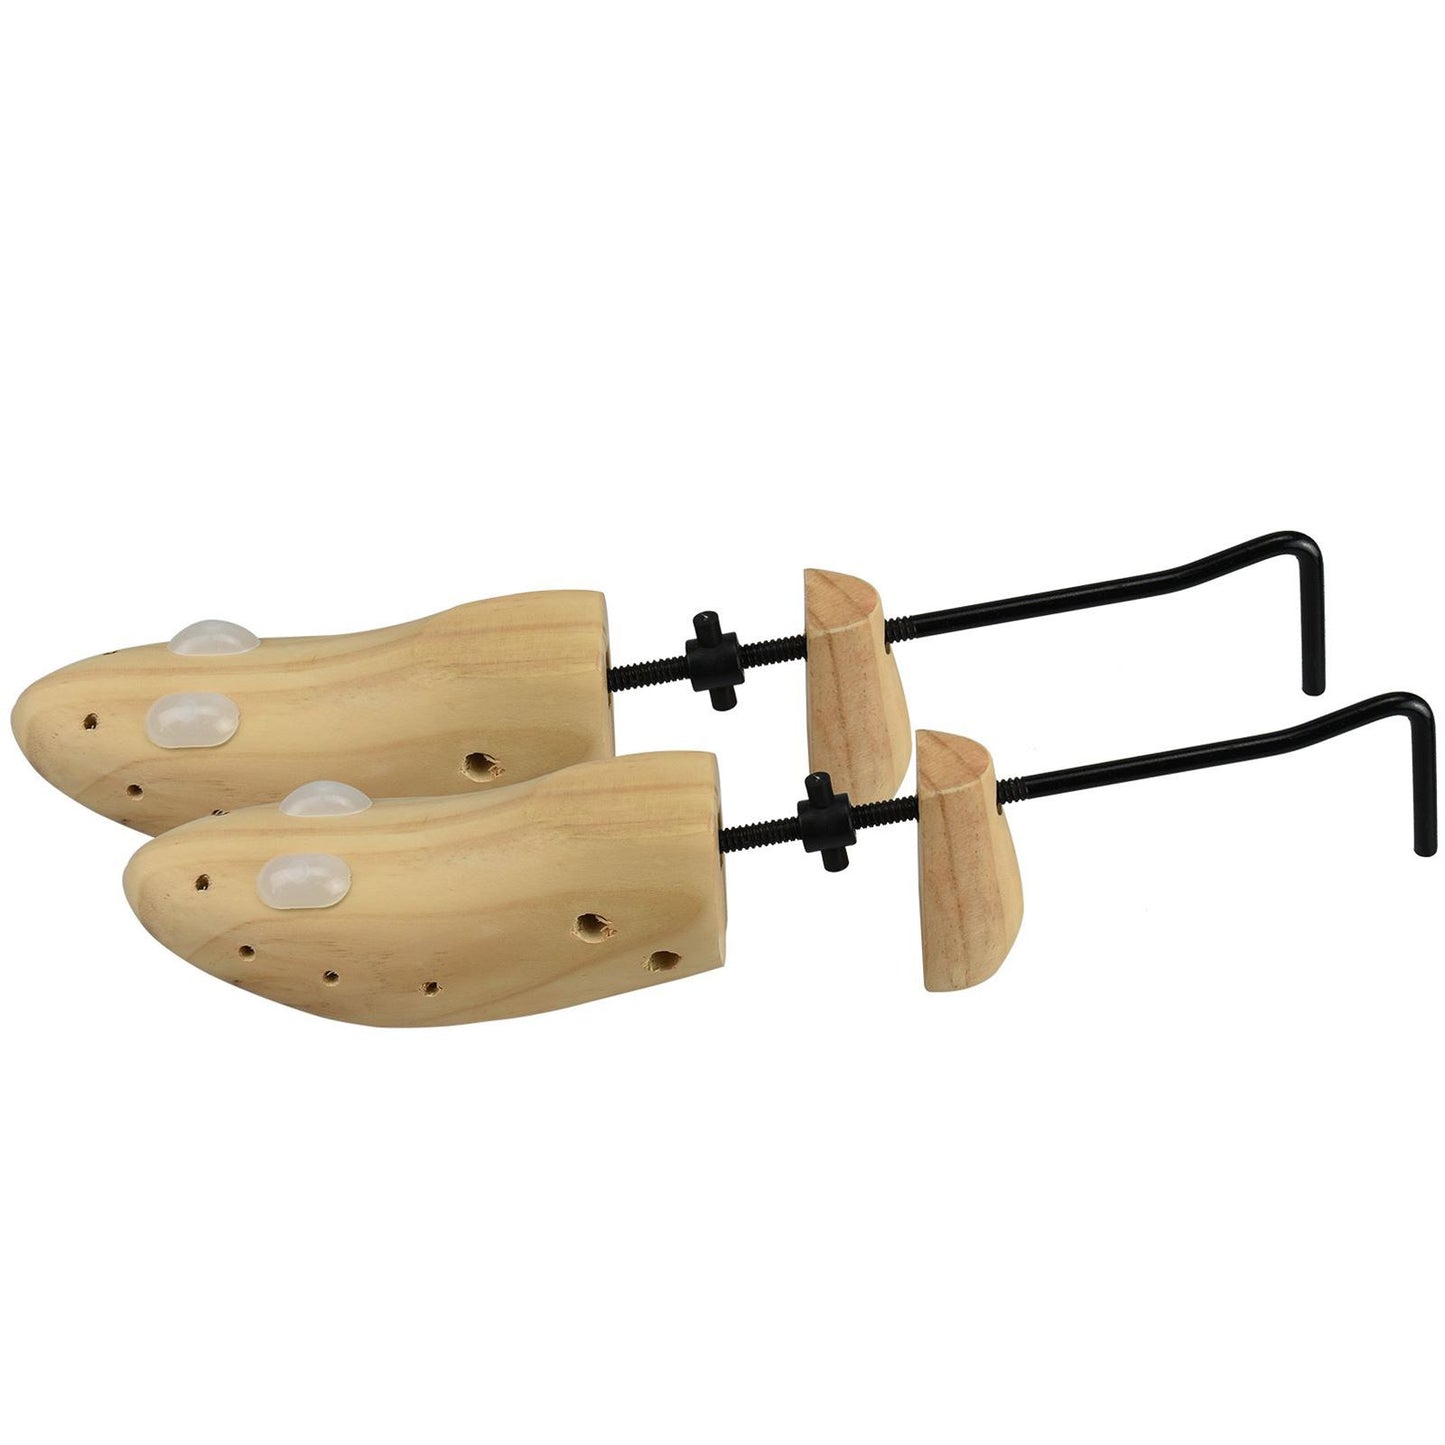 Relieve Foot Pain with 2Pcs Mens Ladies Wooden Shoe Stretcher